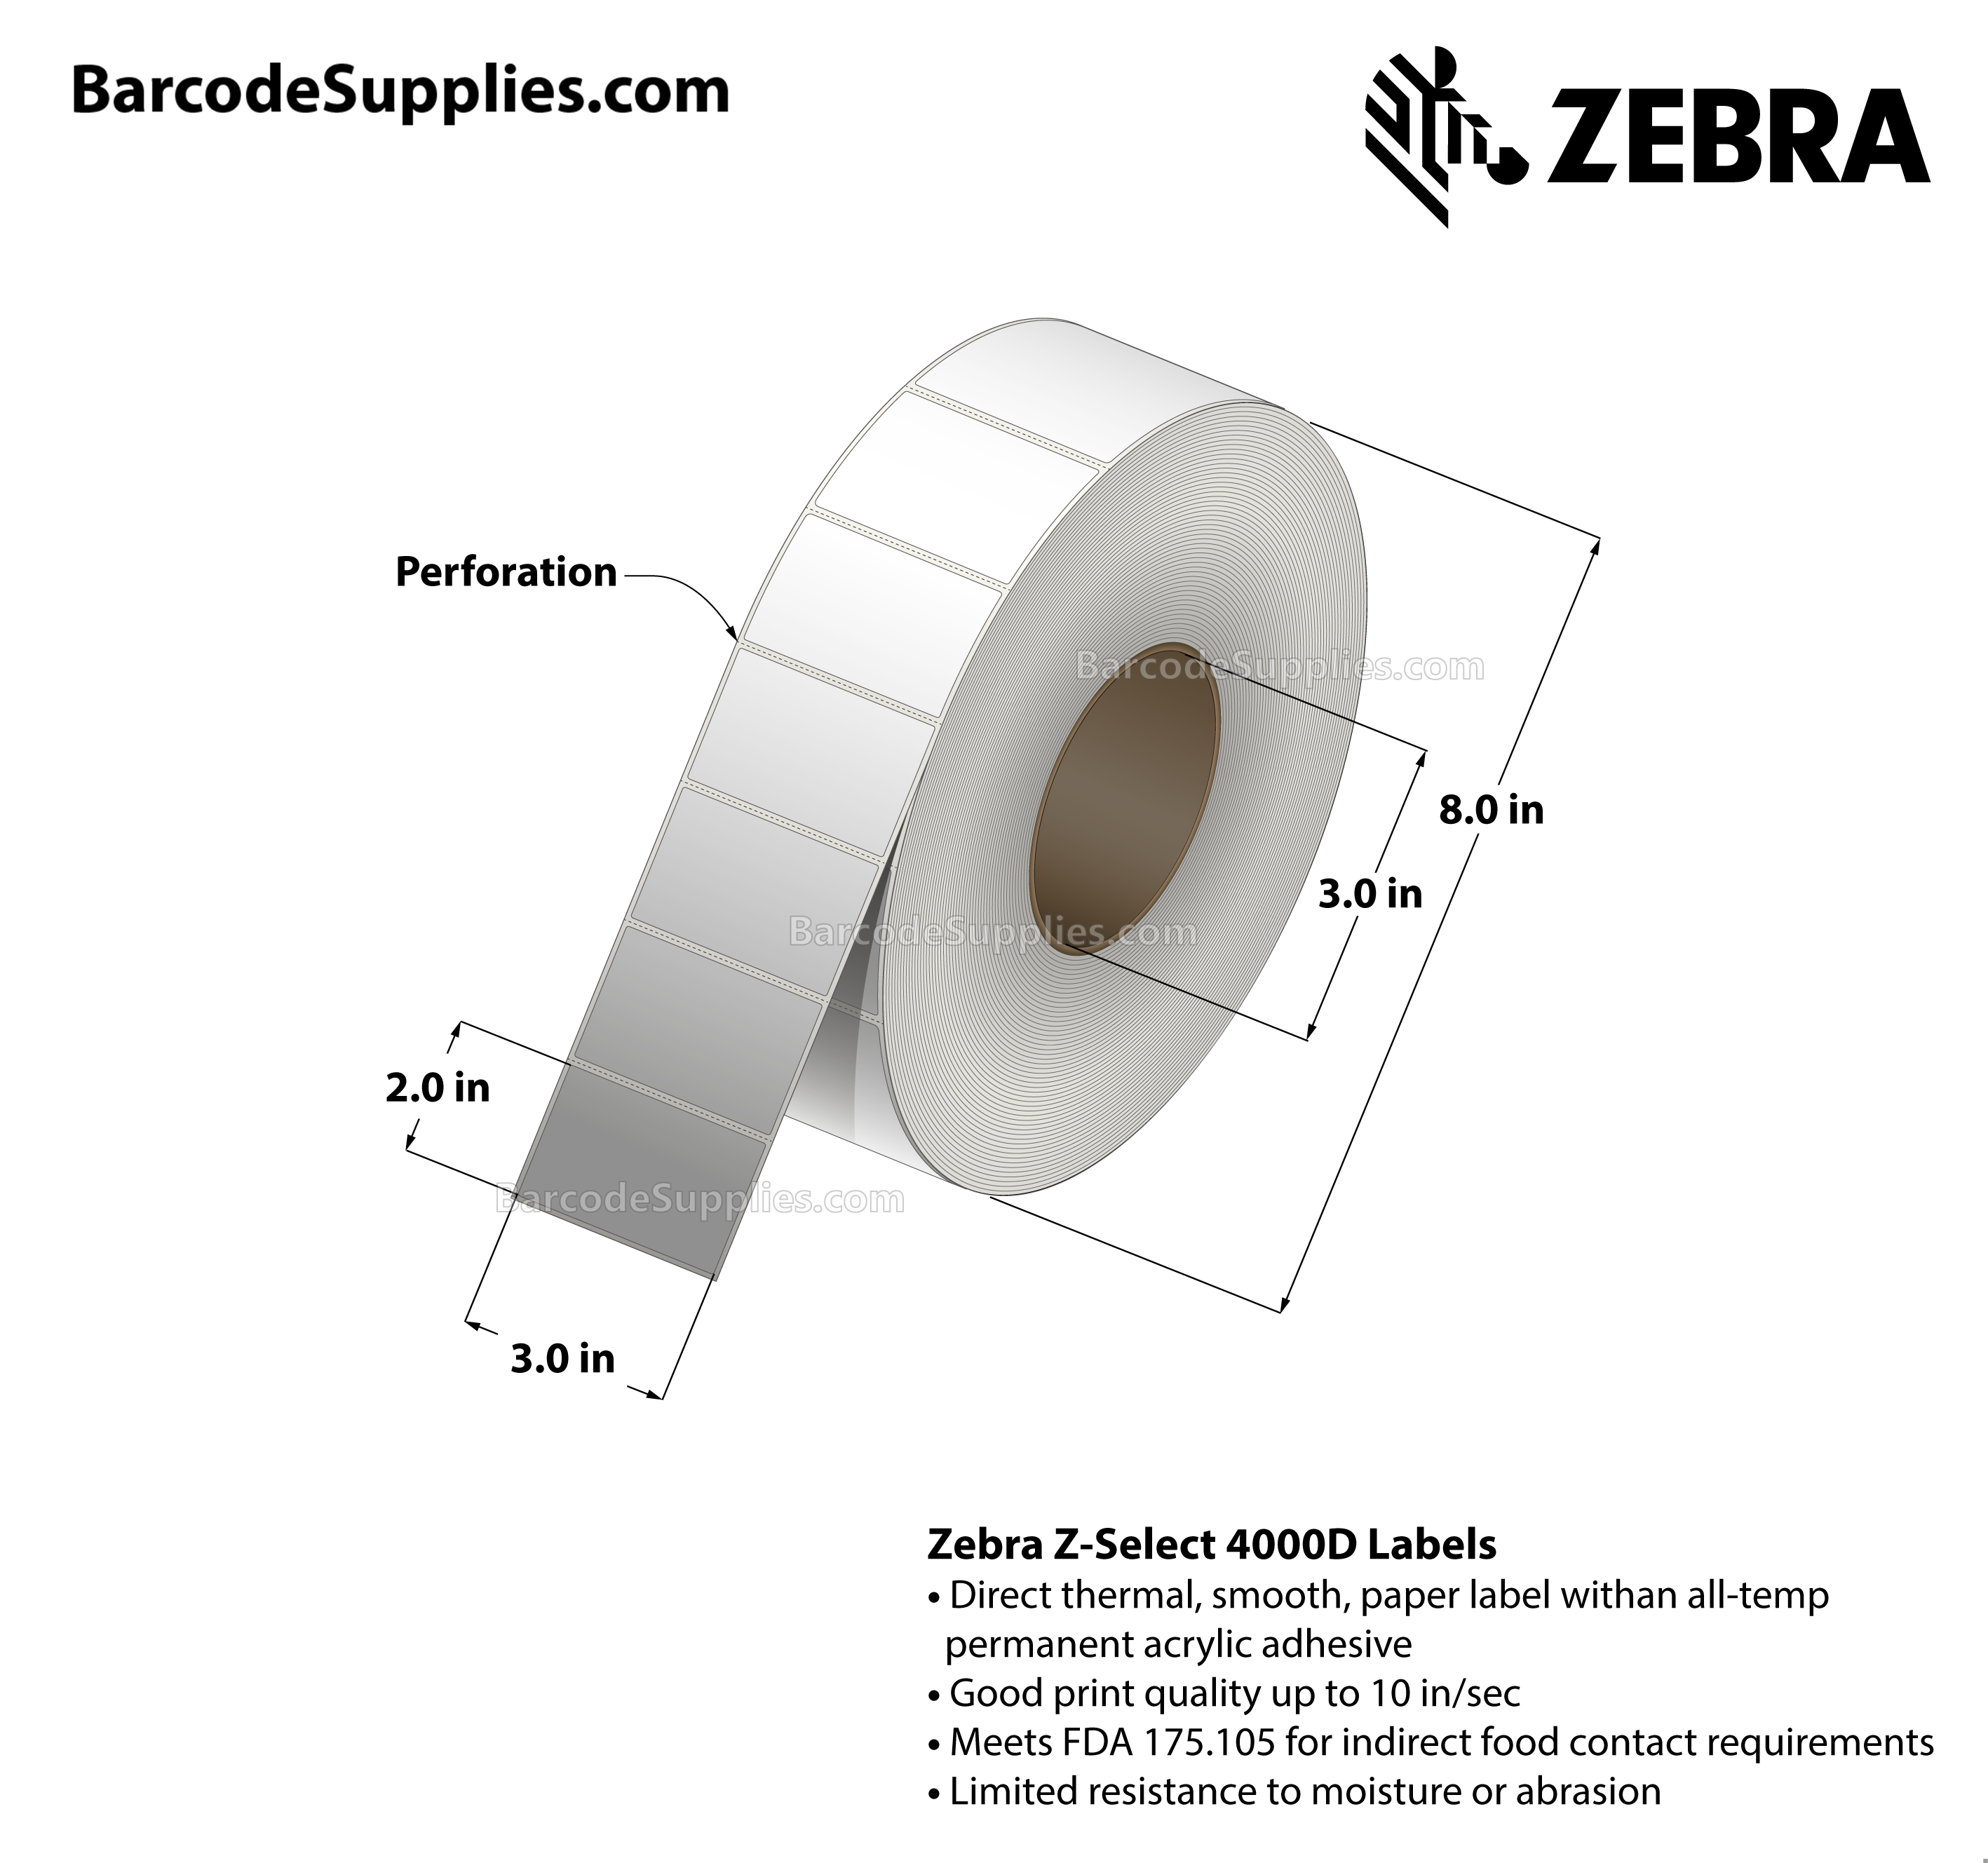 3 x 2 Direct Thermal White Z-Select 4000D Labels With All-Temp Adhesive - Perforated - 2710 Labels Per Roll - Carton Of 6 Rolls - 16260 Labels Total - MPN: 98958